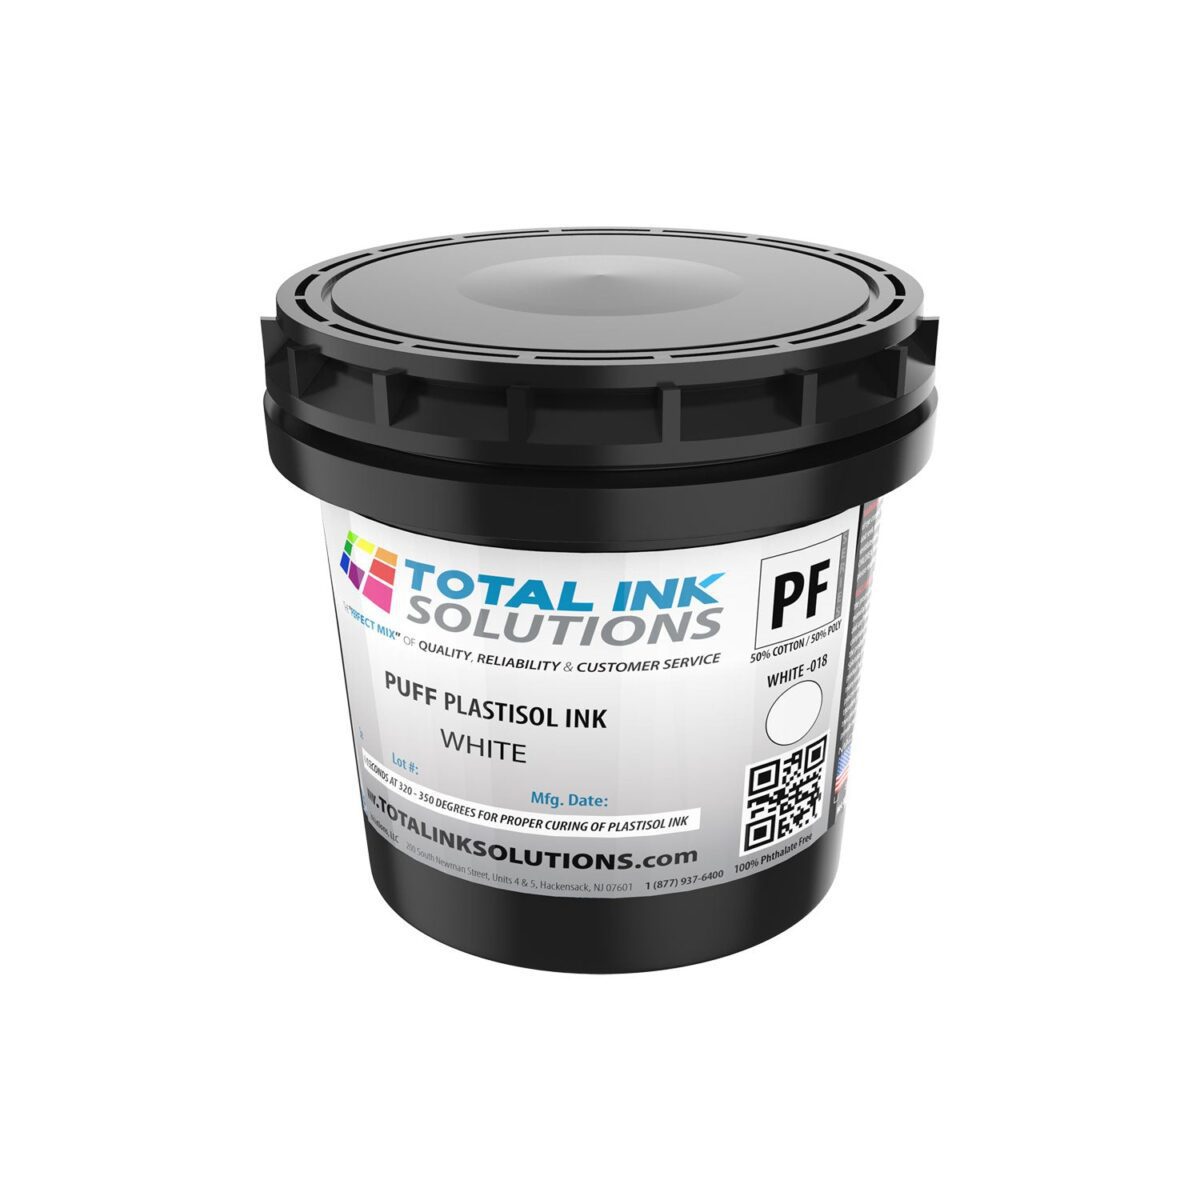 Puff Plastisol Ink - White - Quart TOTAL INK SOLUTIONS®